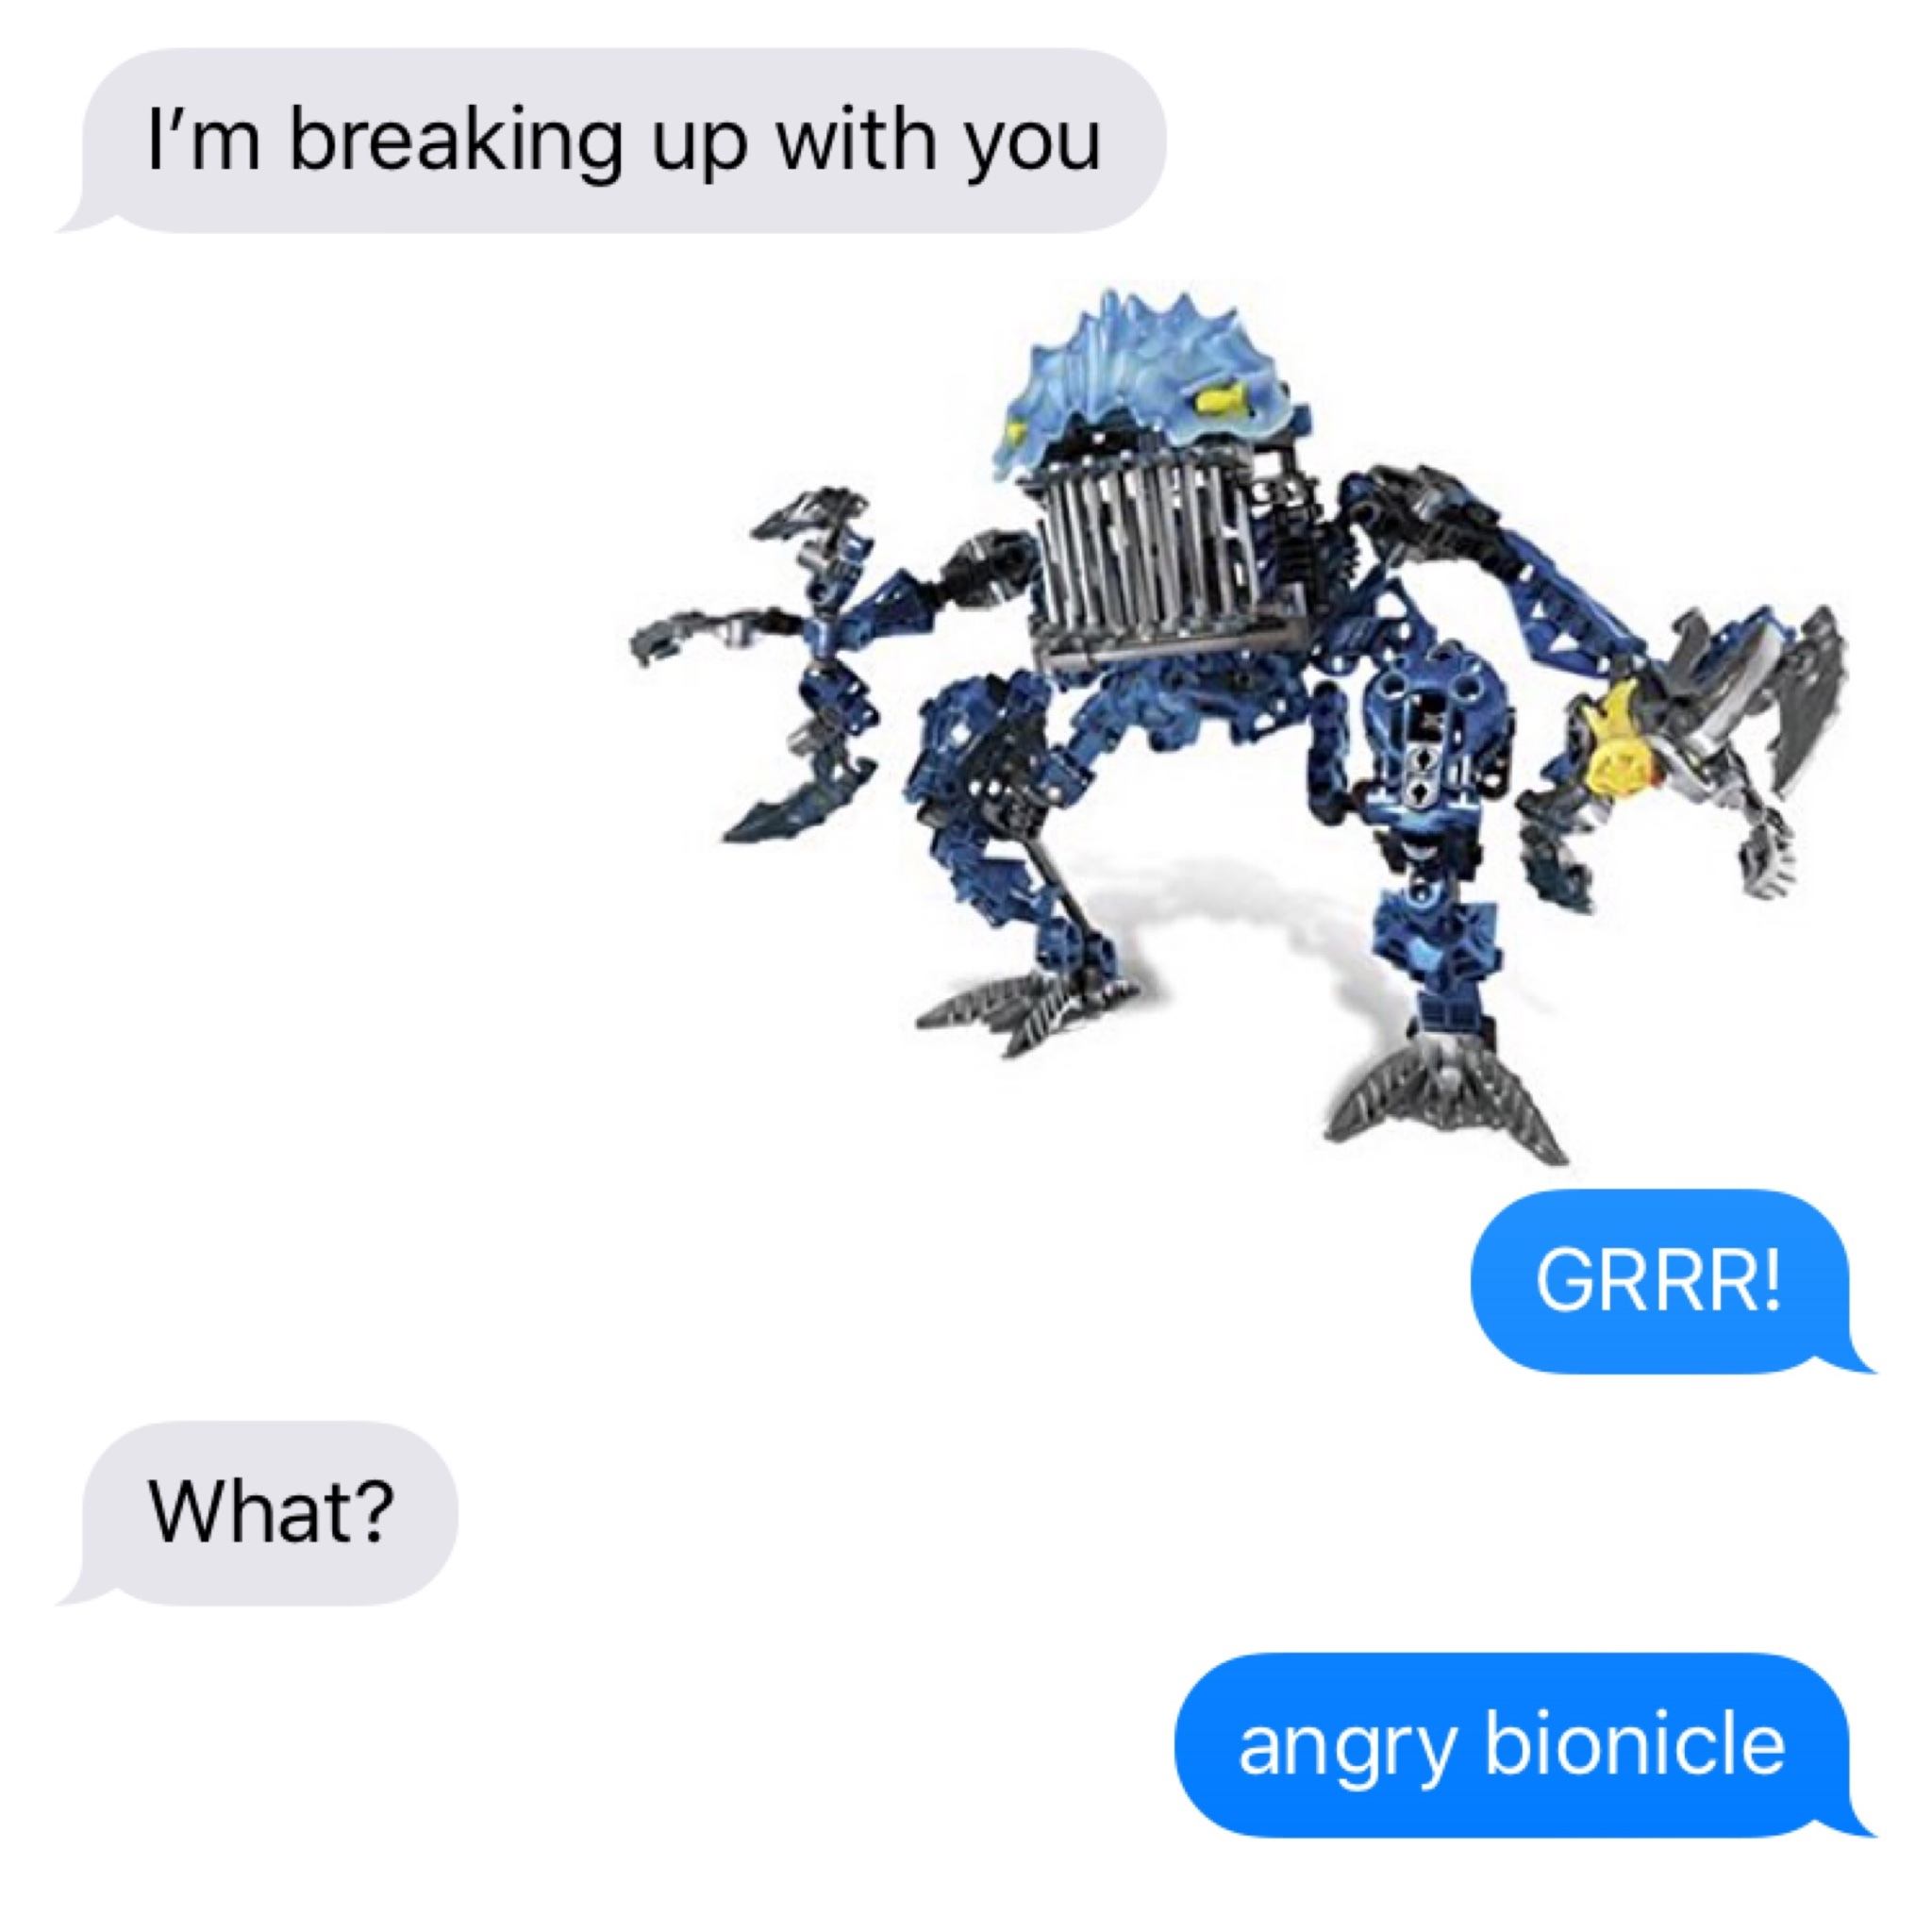 Might just be the funniest meme I’ve ever made, also the bionicle himself is called Gadunka and he’s often angry but I love him unconditionally because he’s like a son to me. Yesterday he did bite a stranger but these are just things that happen